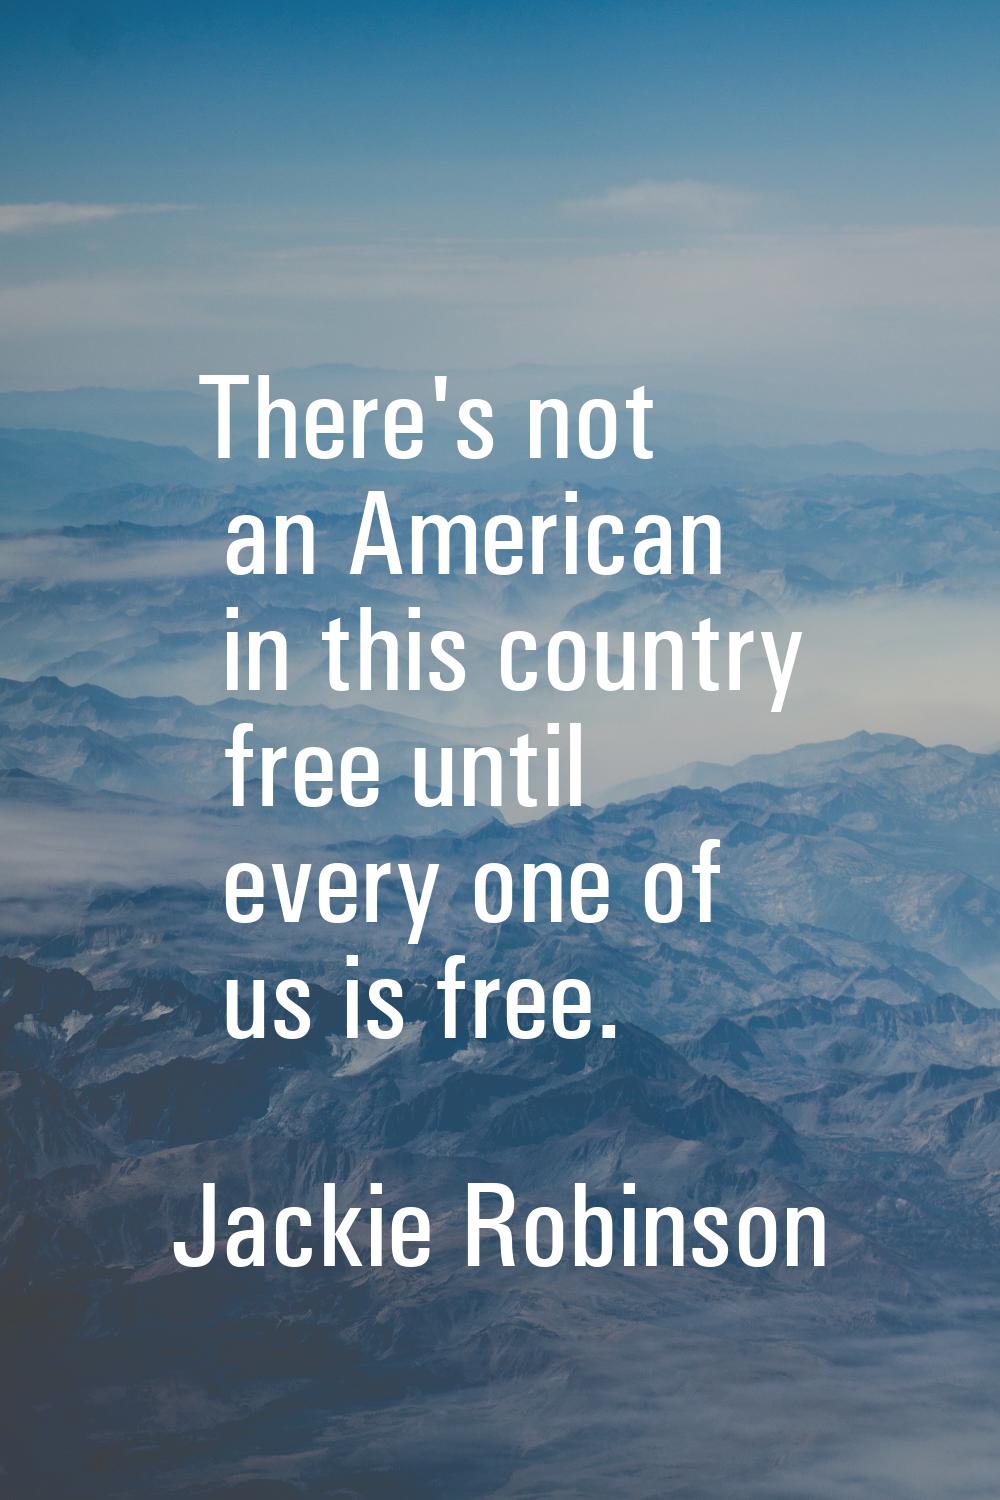 There's not an American in this country free until every one of us is free.